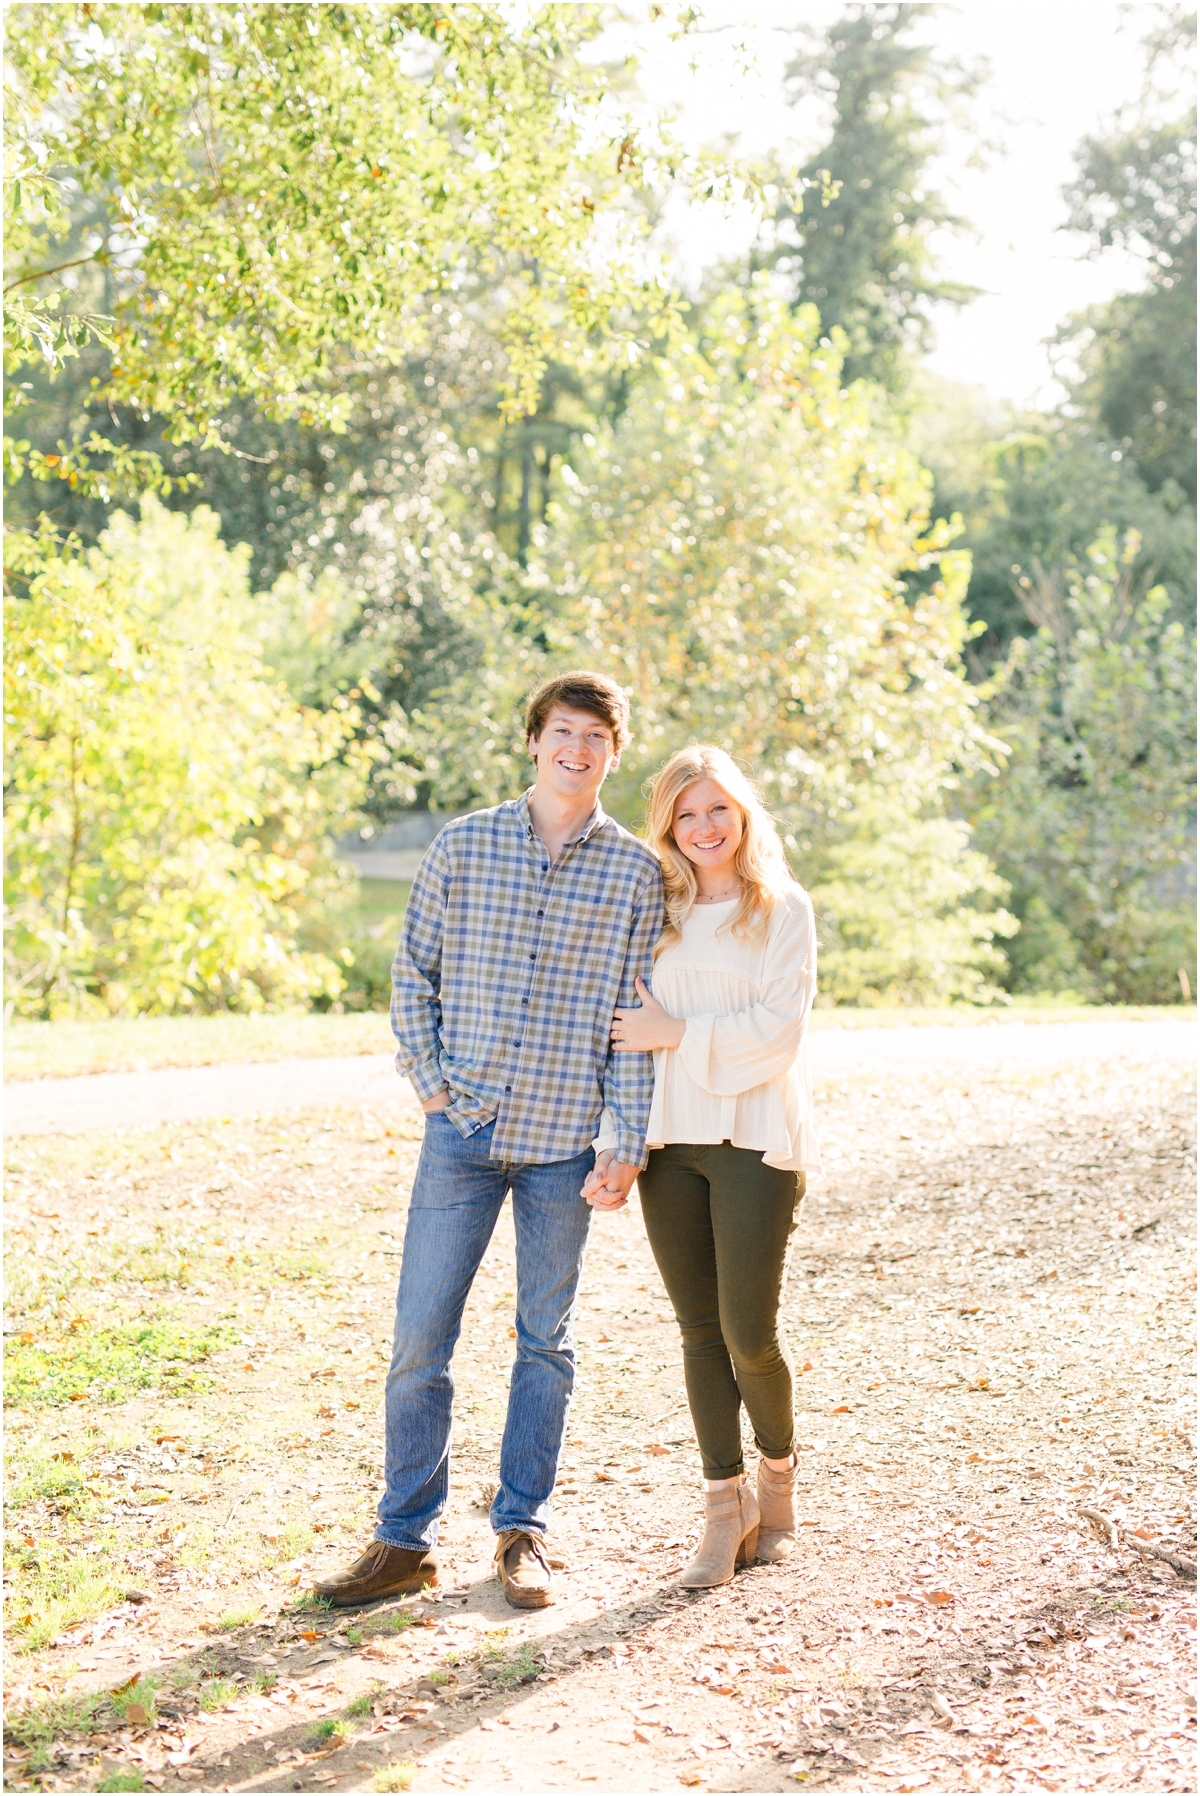 Cleveland Park engagement session in downtown greenville | greenville wedding photographer